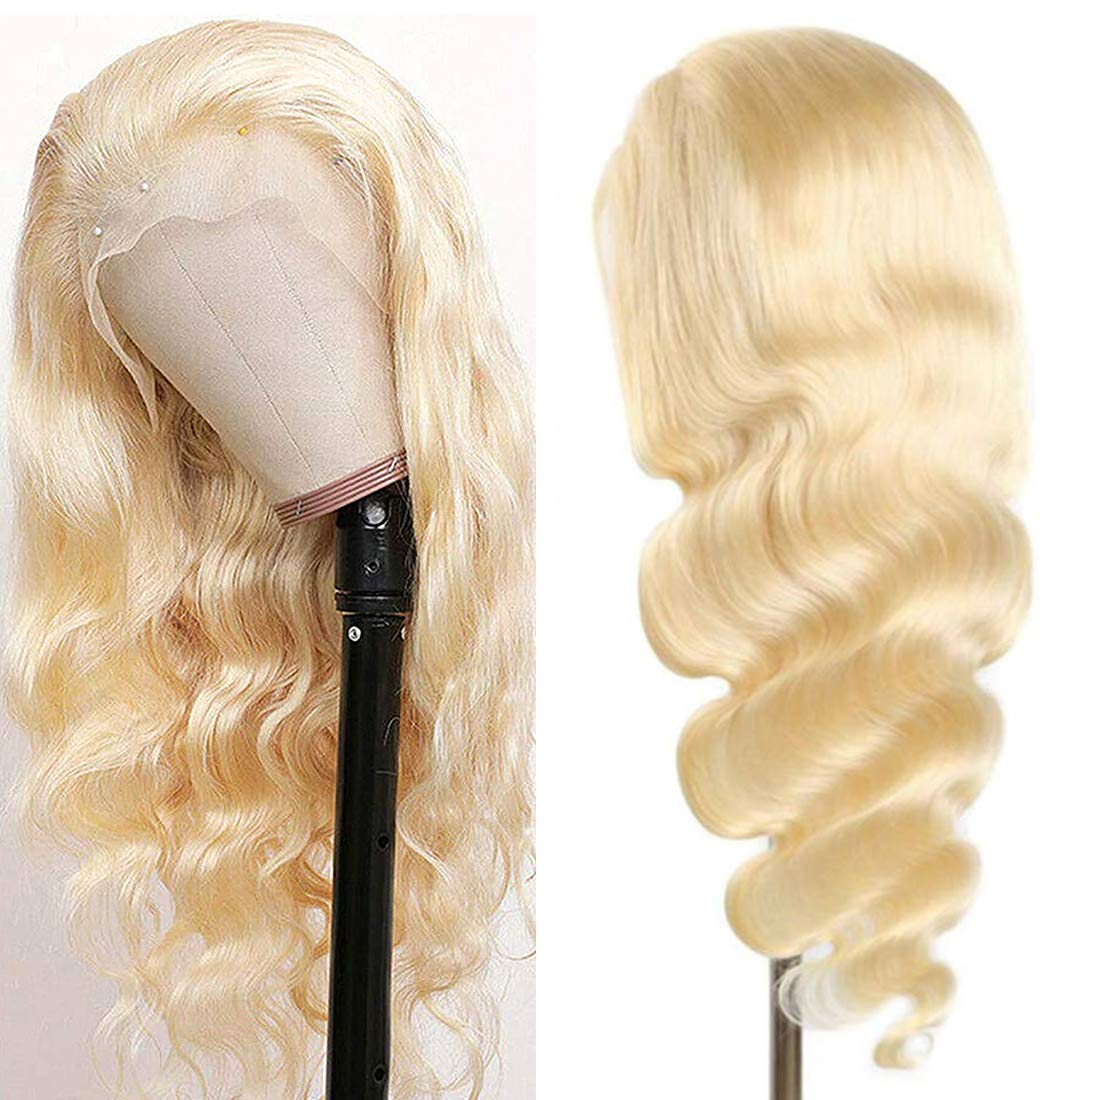 Ronashow Hair 613 Blonde Body Wave 13*4 Lace Frontal Wig